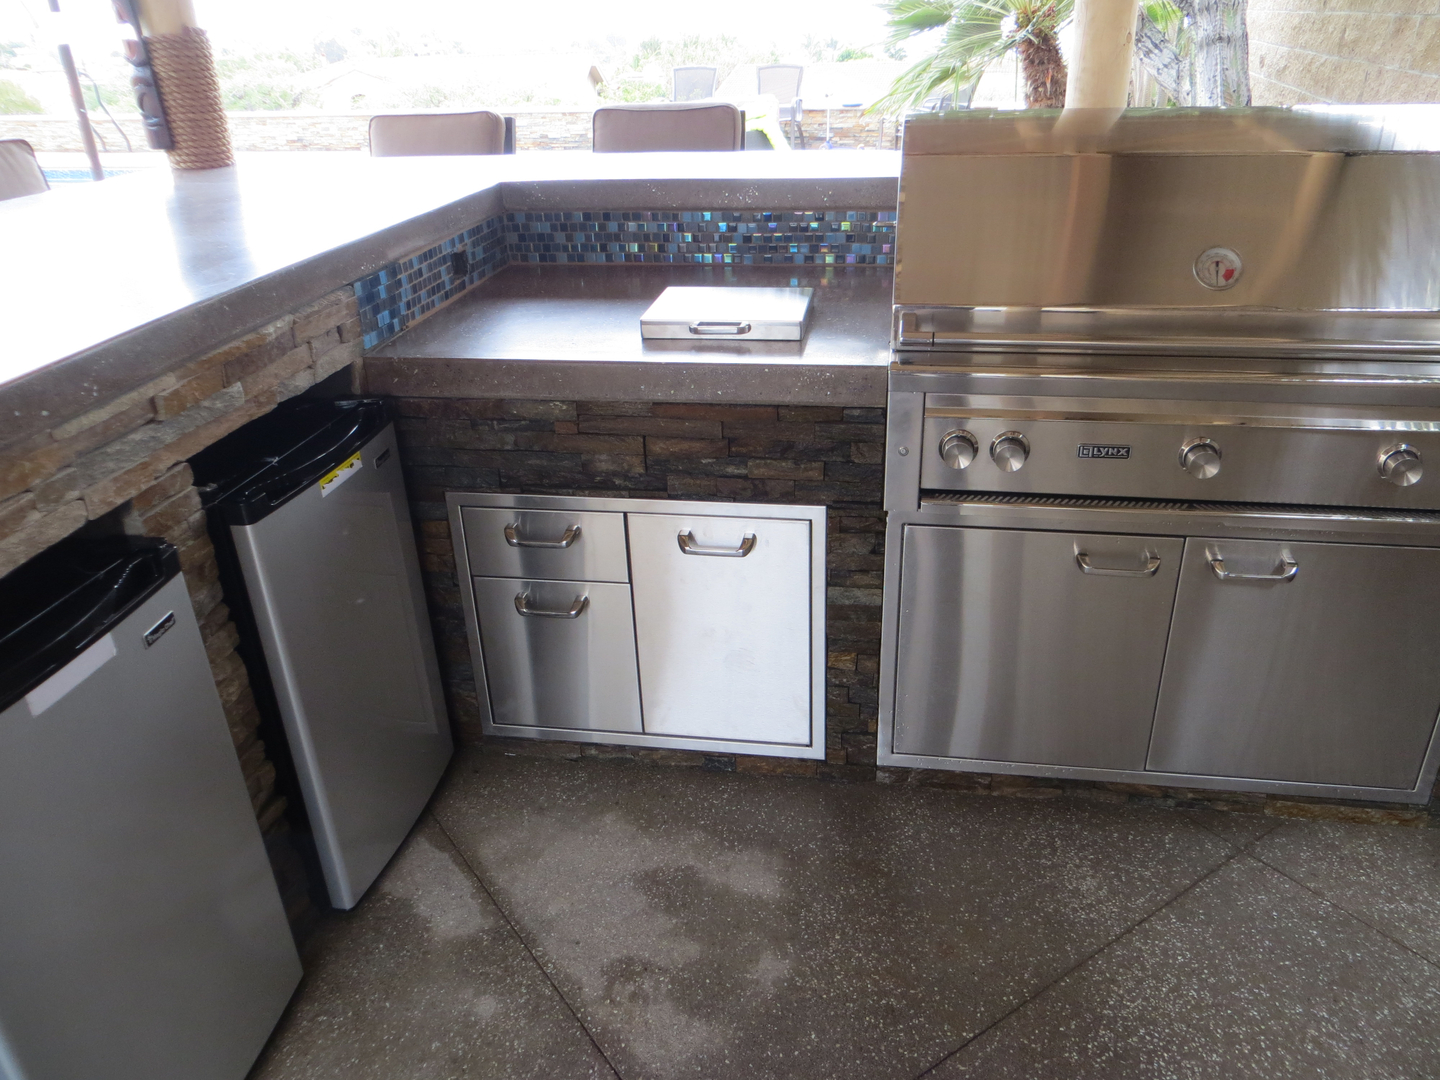 An Outdoor Kitchen Area With Stainless Steel Area